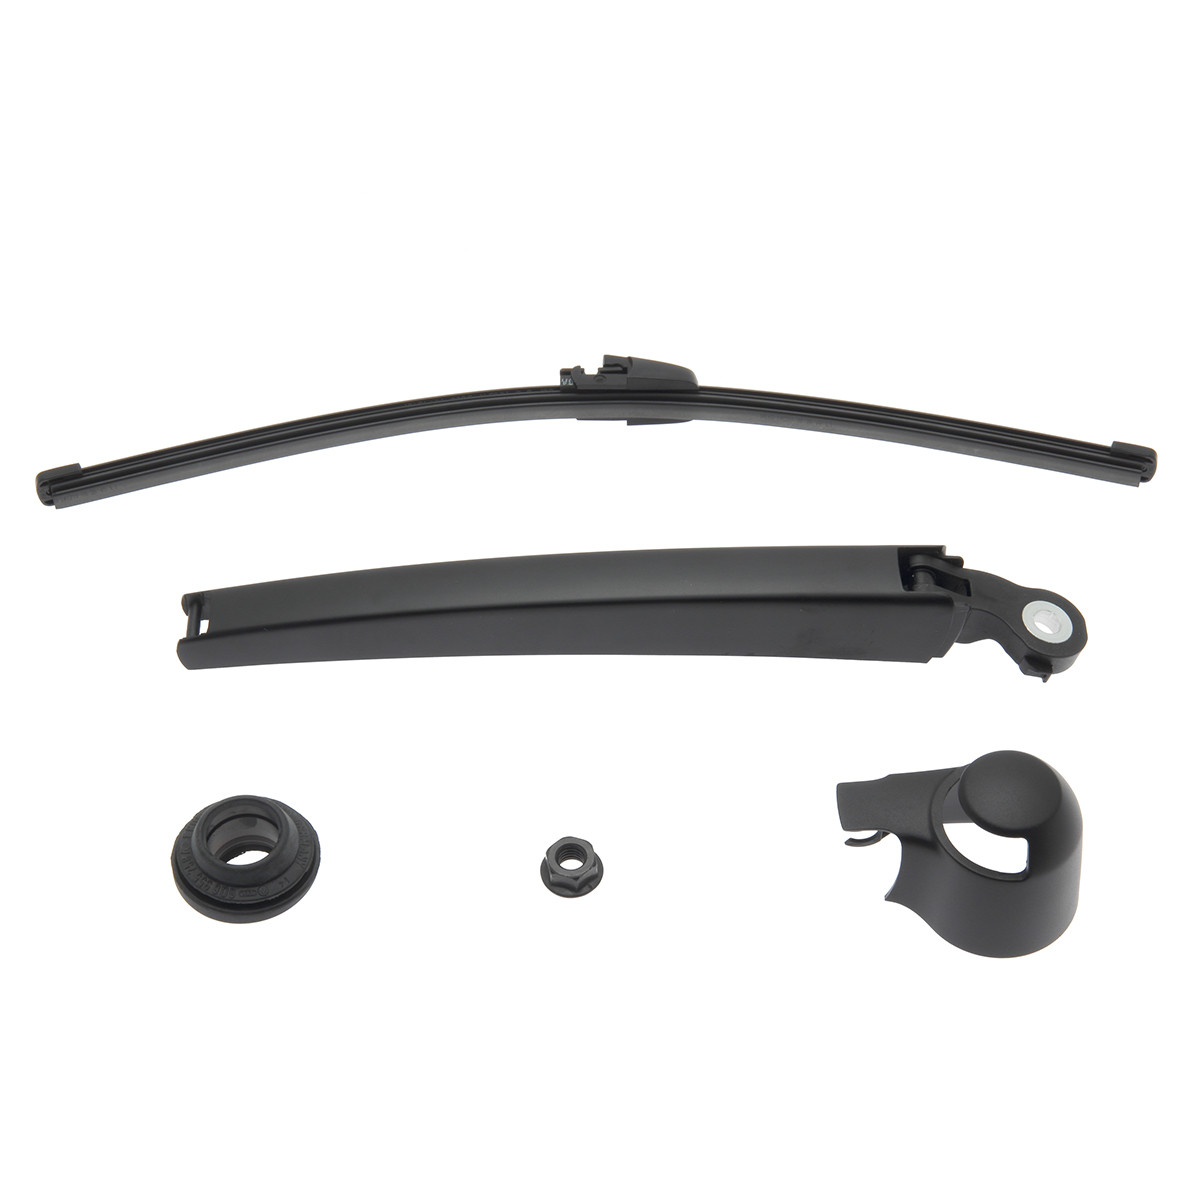 D DOLITY Auto Replacement Windshield Rear Wiper Blade Arm Kit for VW Volkswagen Tiguan